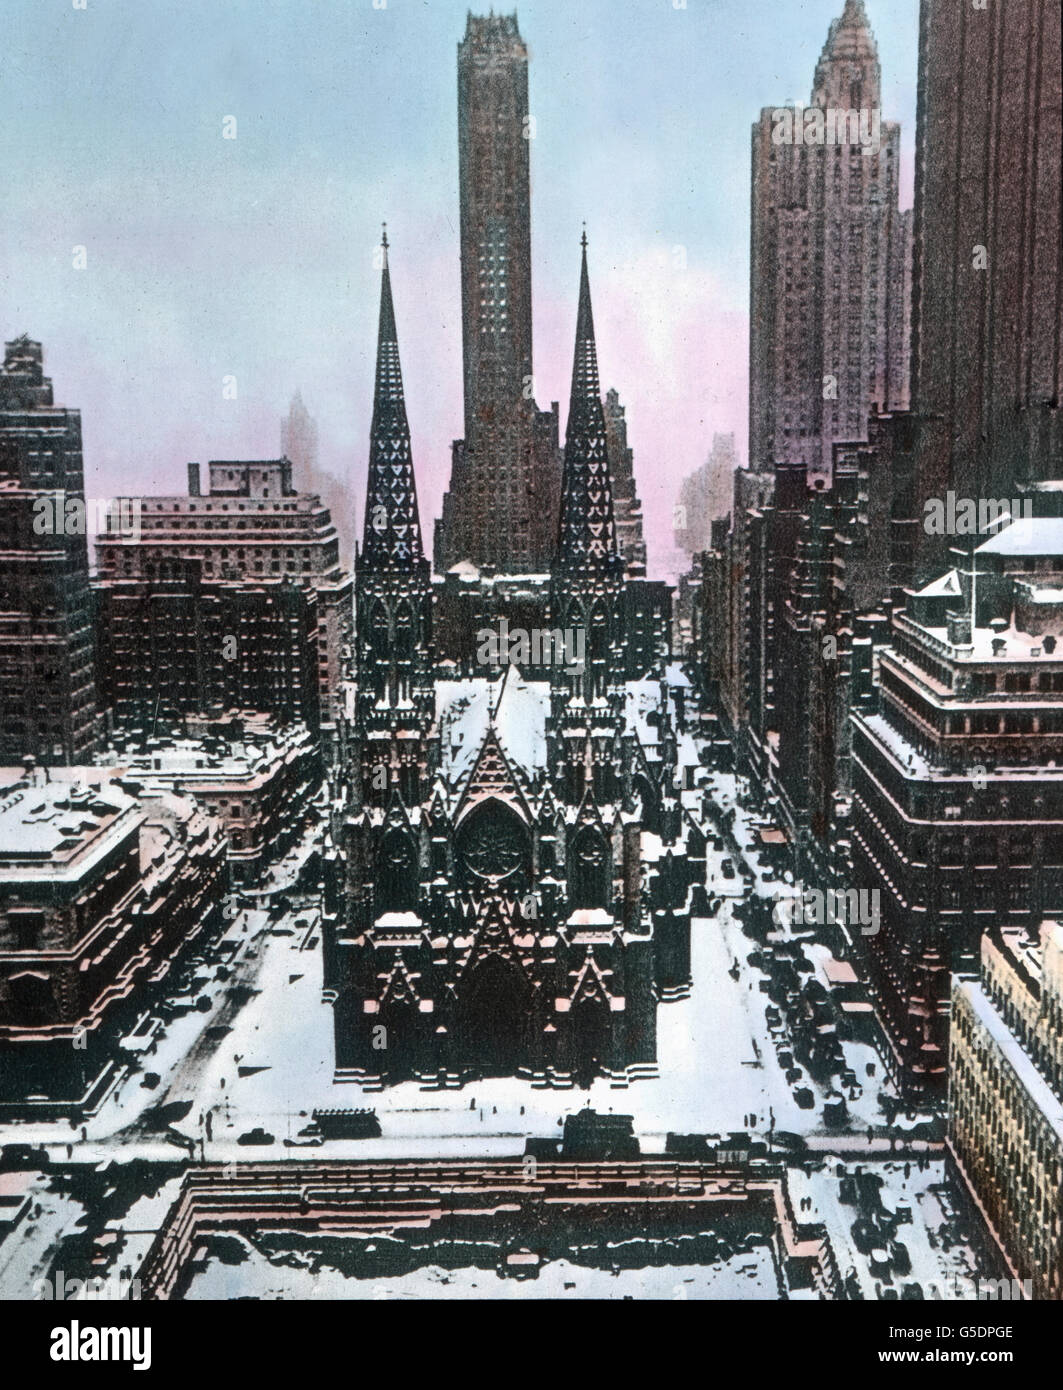 Die St. Patrick's Cathedral in New York im Schnee.  America, North, USA, United States of America, New York, travel, 1910s, 1920s, 20th century, archive, Carl Simon, history, historical, architecture, church, cathedral, archbishop, religion, belief, snow, ice, winter, frost, snowfall, hand coloured glass slide Stock Photo